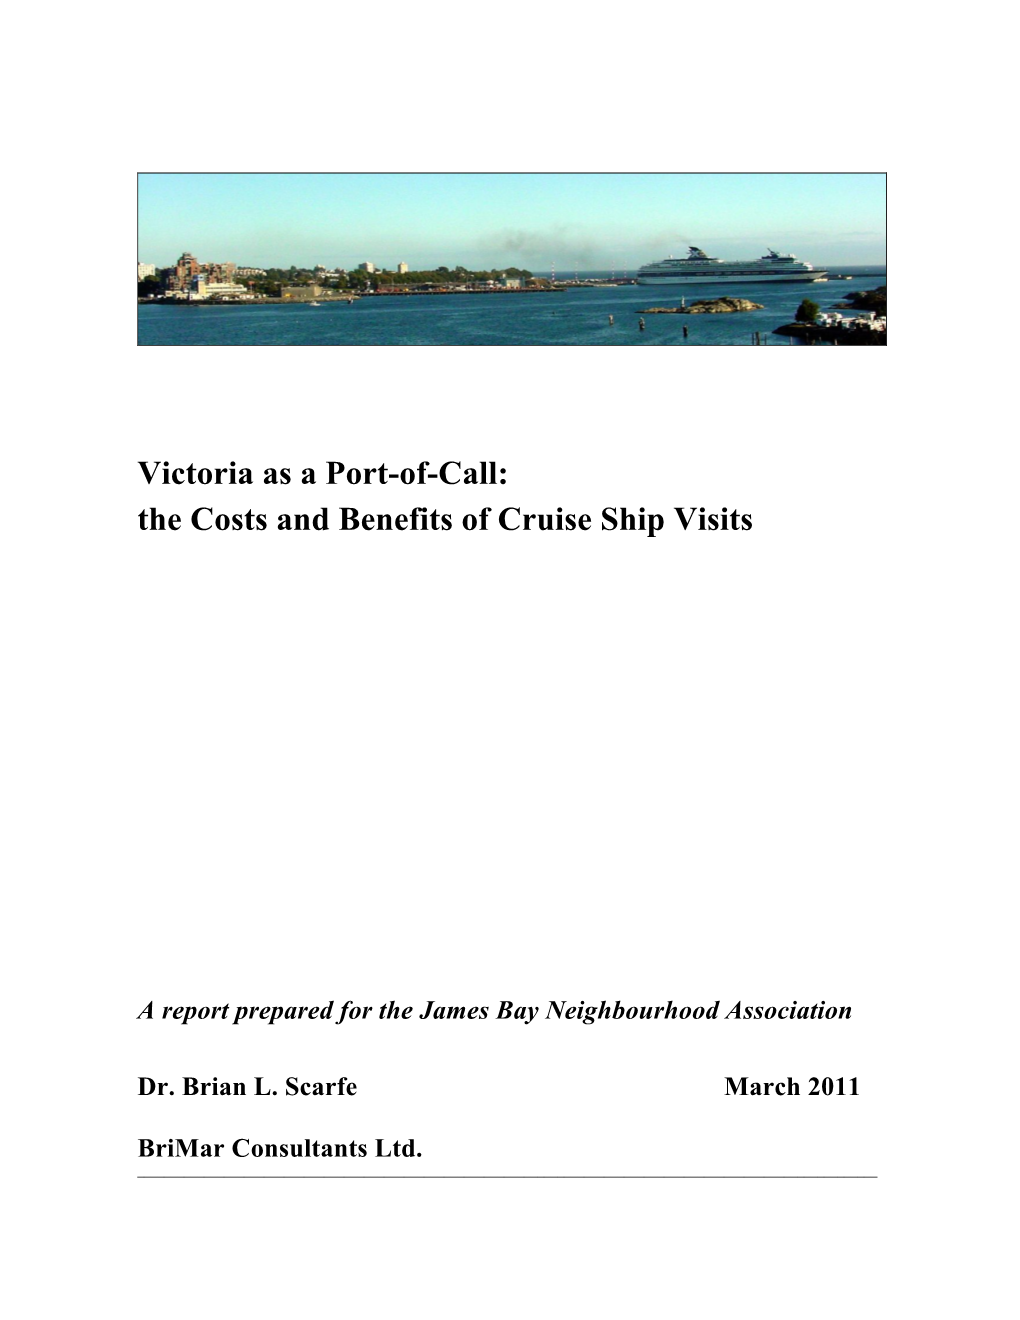 Victoria As a Port-Of-Call: the Costs and Benefits of Cruise Ship Visits